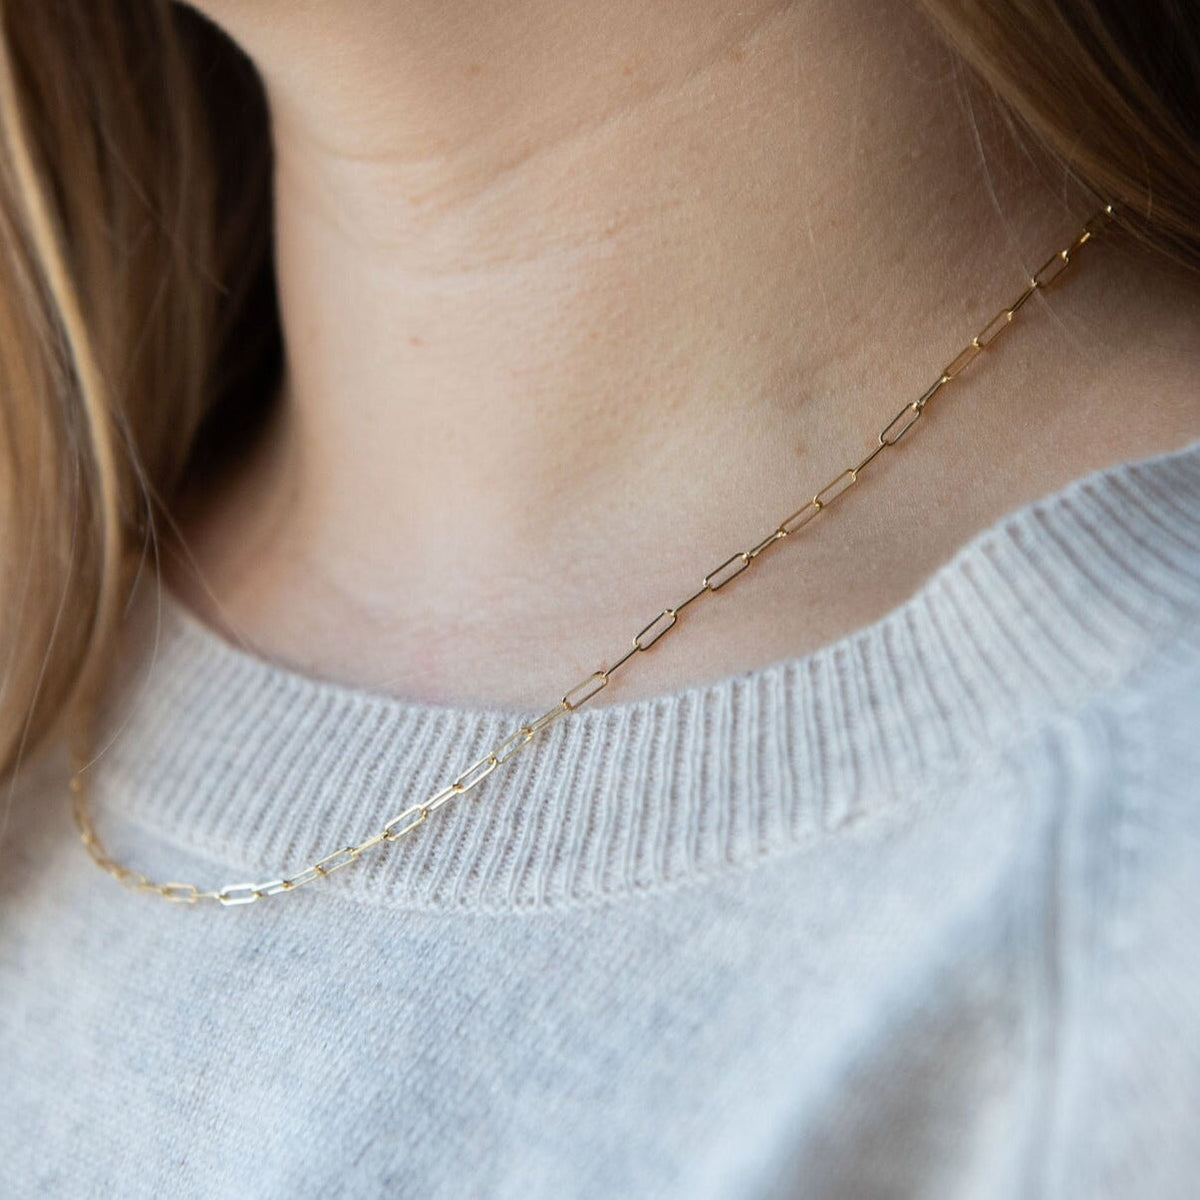 Chunky Paperclip Chain Necklace - Chocolate Brown | Lydia Lister Jewelry